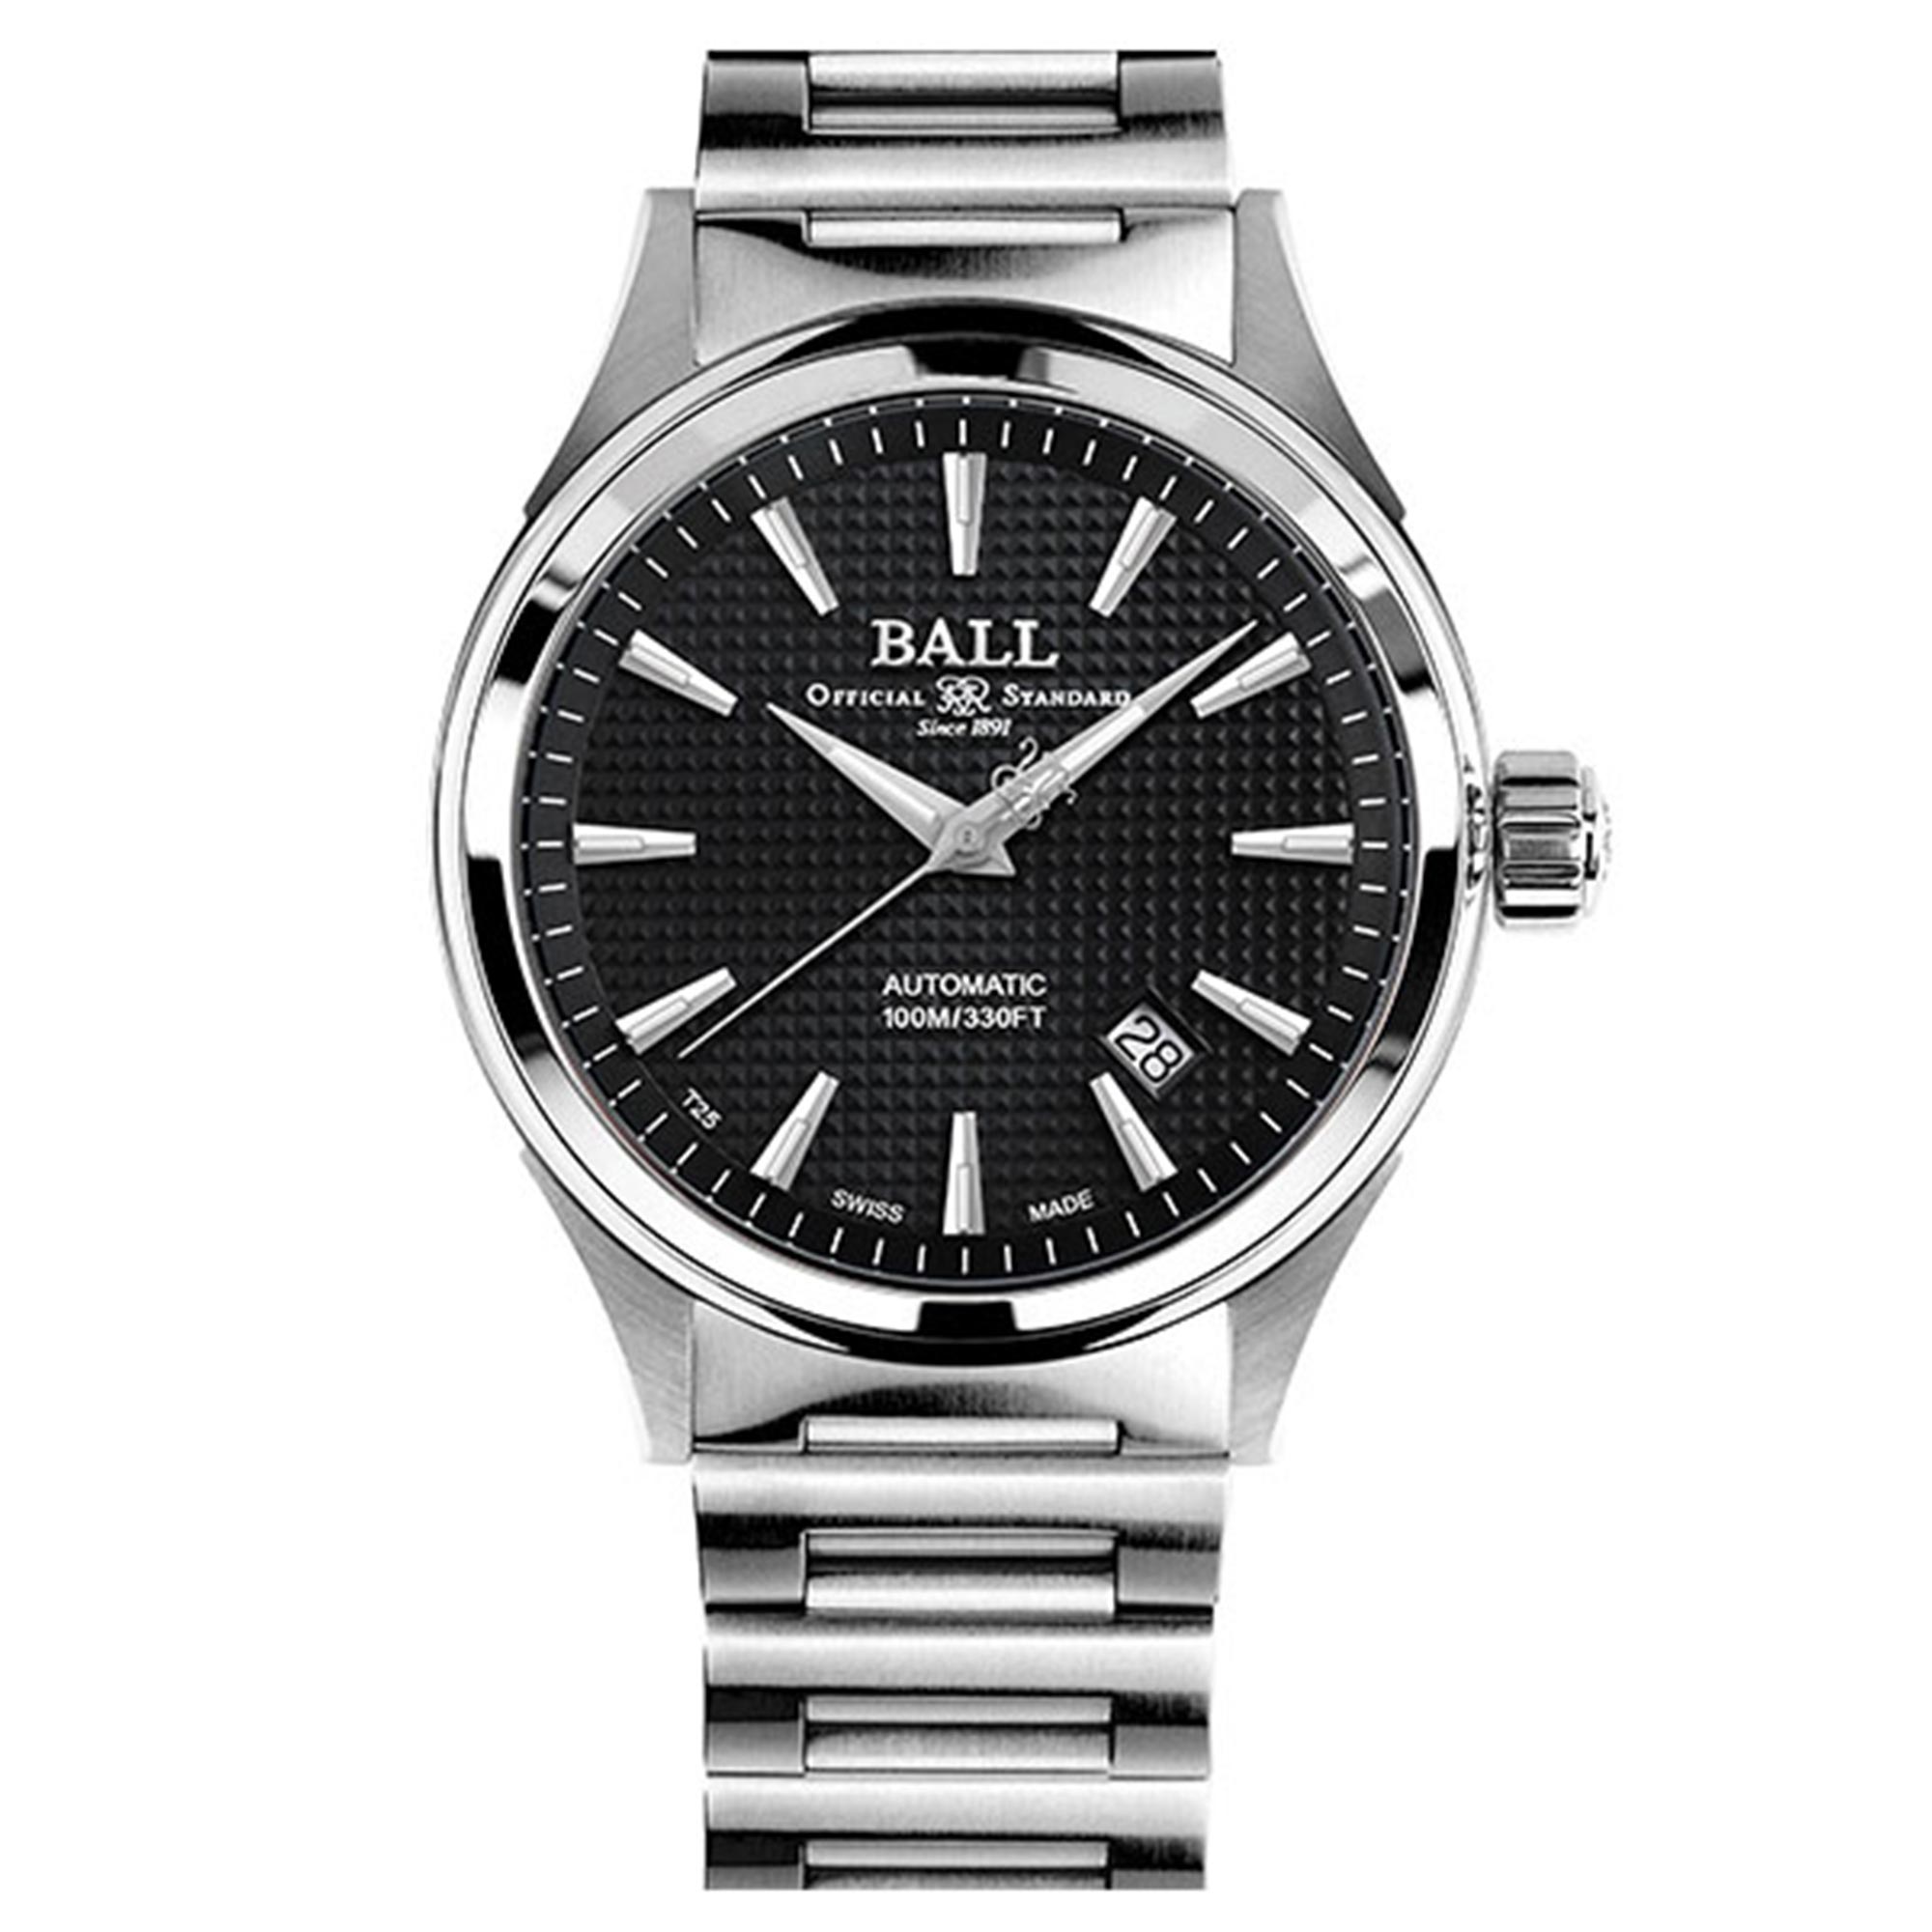 Ball Fireman Victory Automatic Black Dial Silver Stainless Steel Bracelet Mens Watch Nm2098c-s5j-be